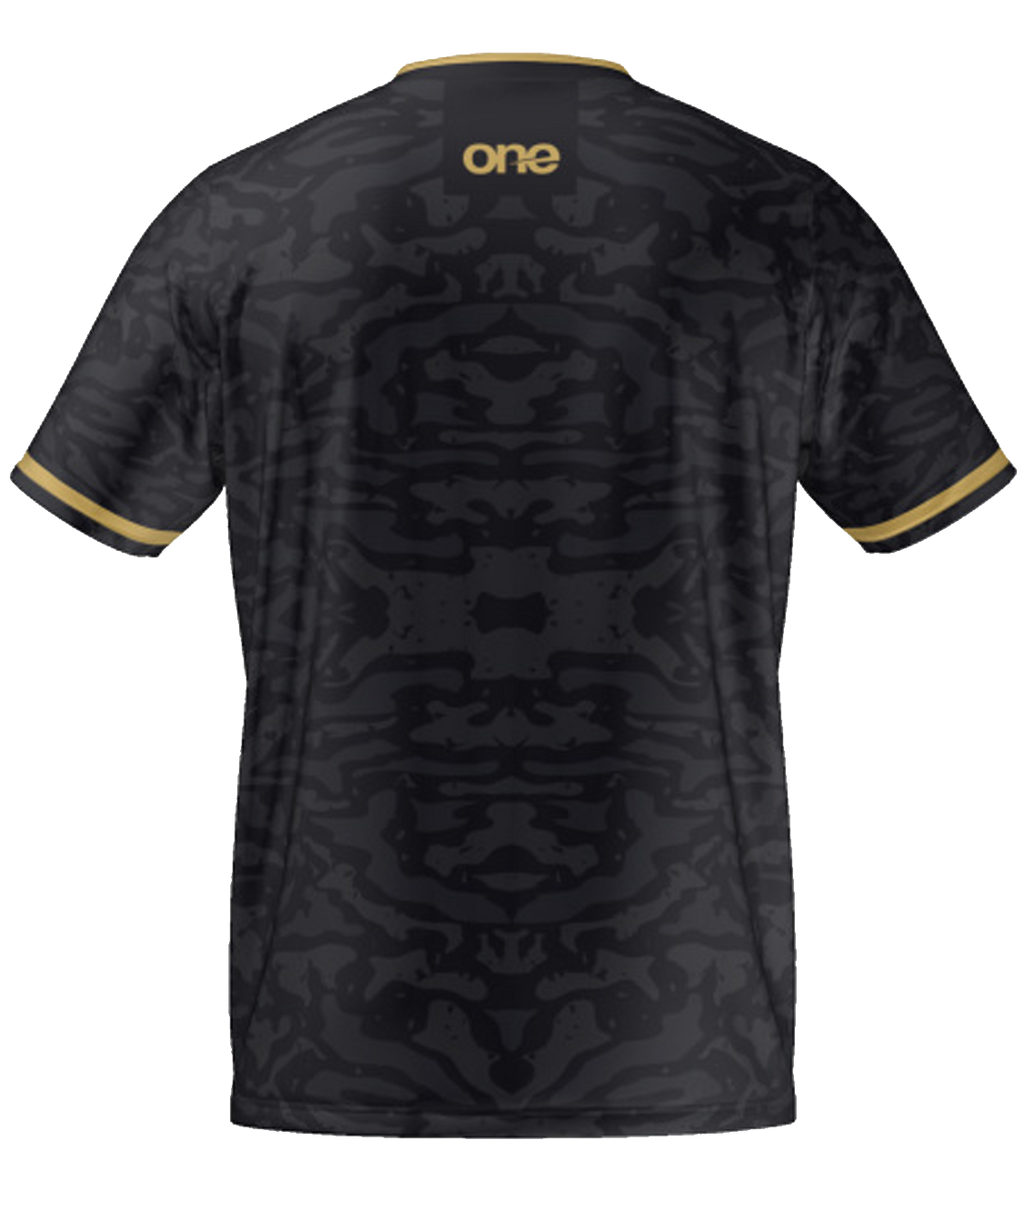 Limited Edition Cameroon Lifestyle Jerseys